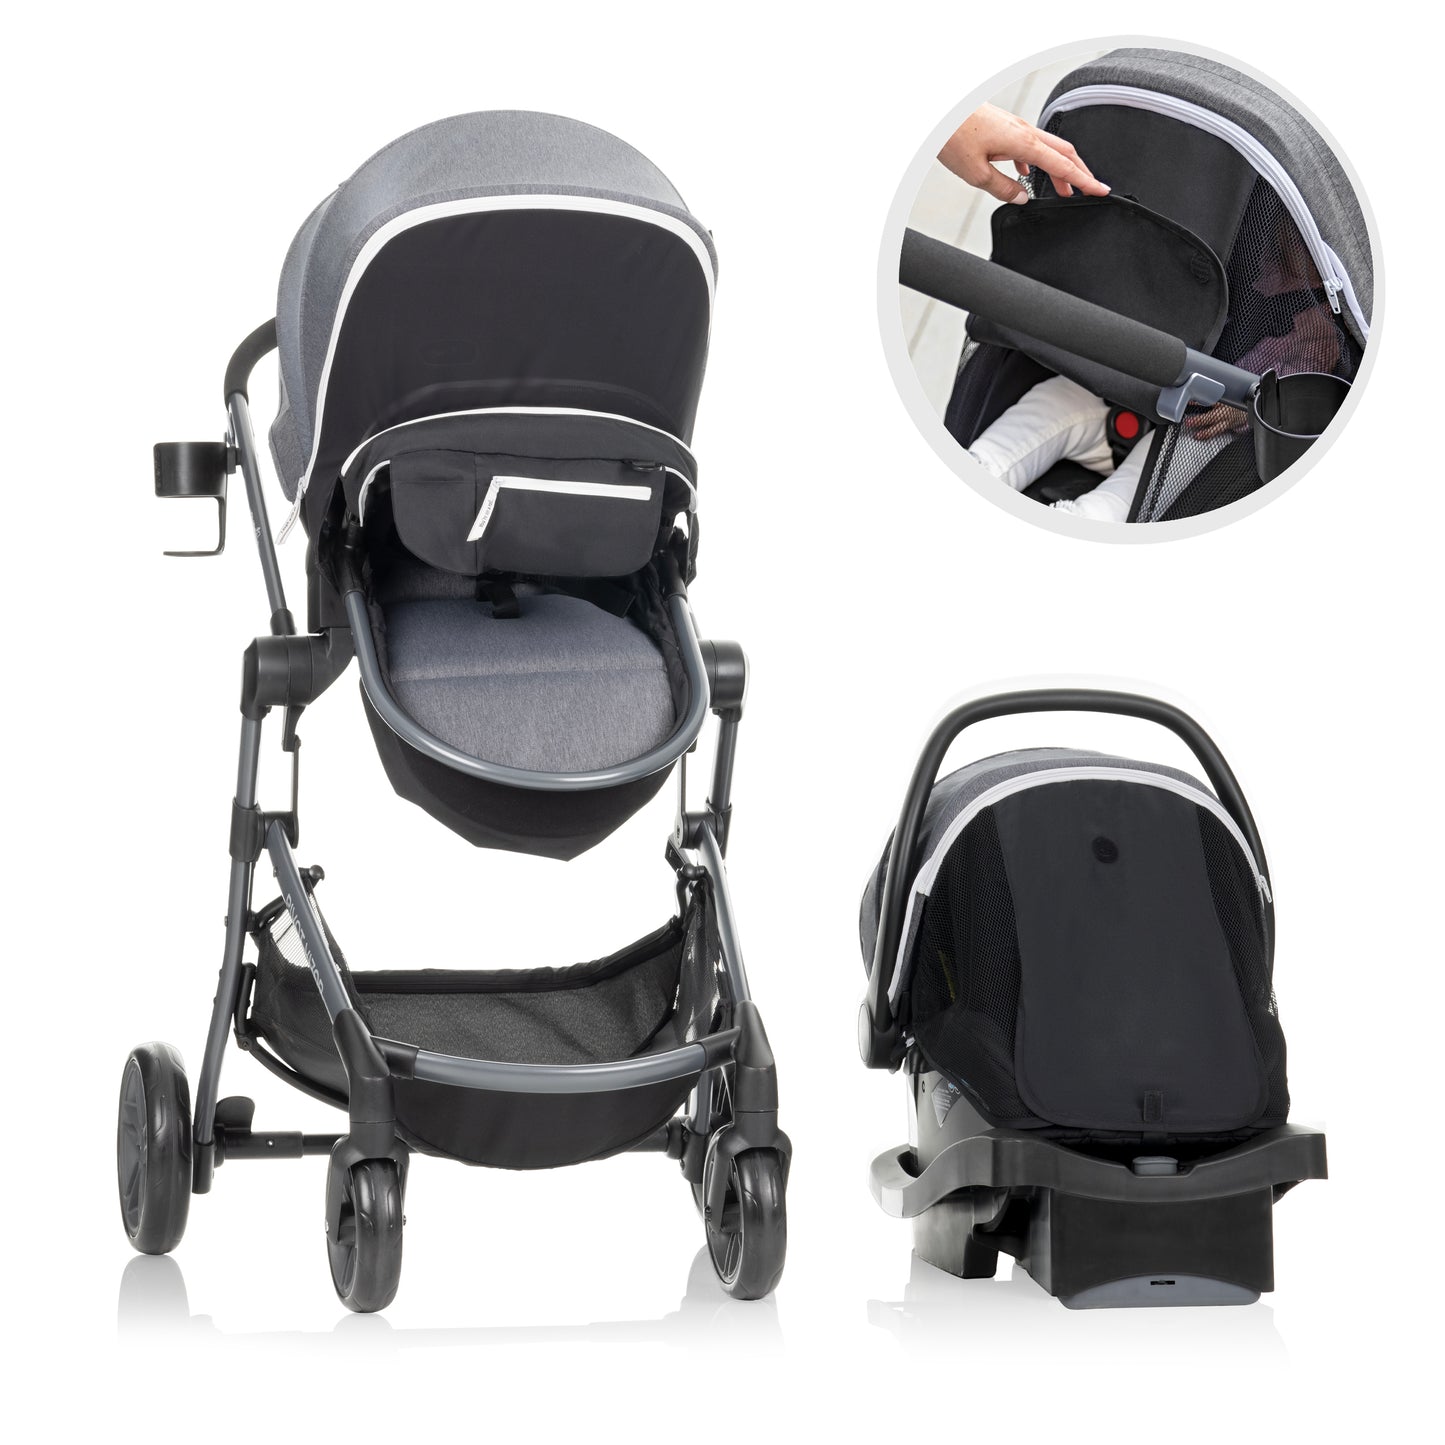 Pivot Vizor Travel System with LiteMax Infant Car Seat Support